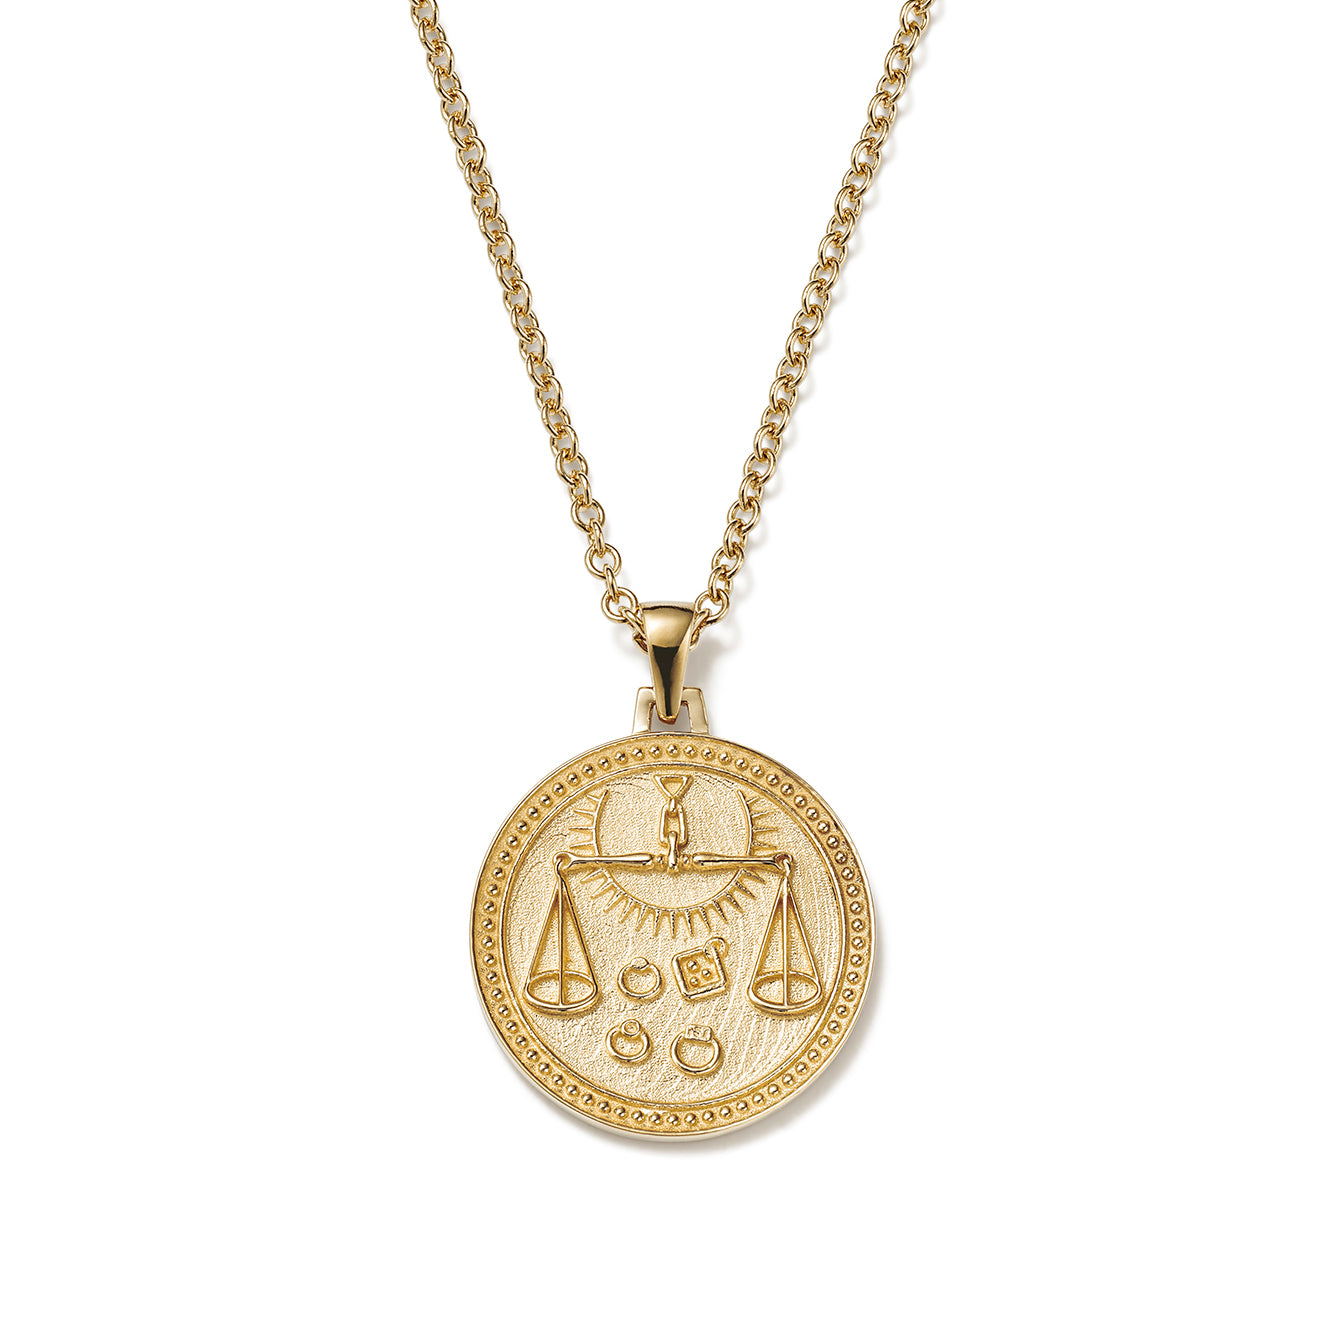 Engraved Libra Charm Necklace with Personalized Initial